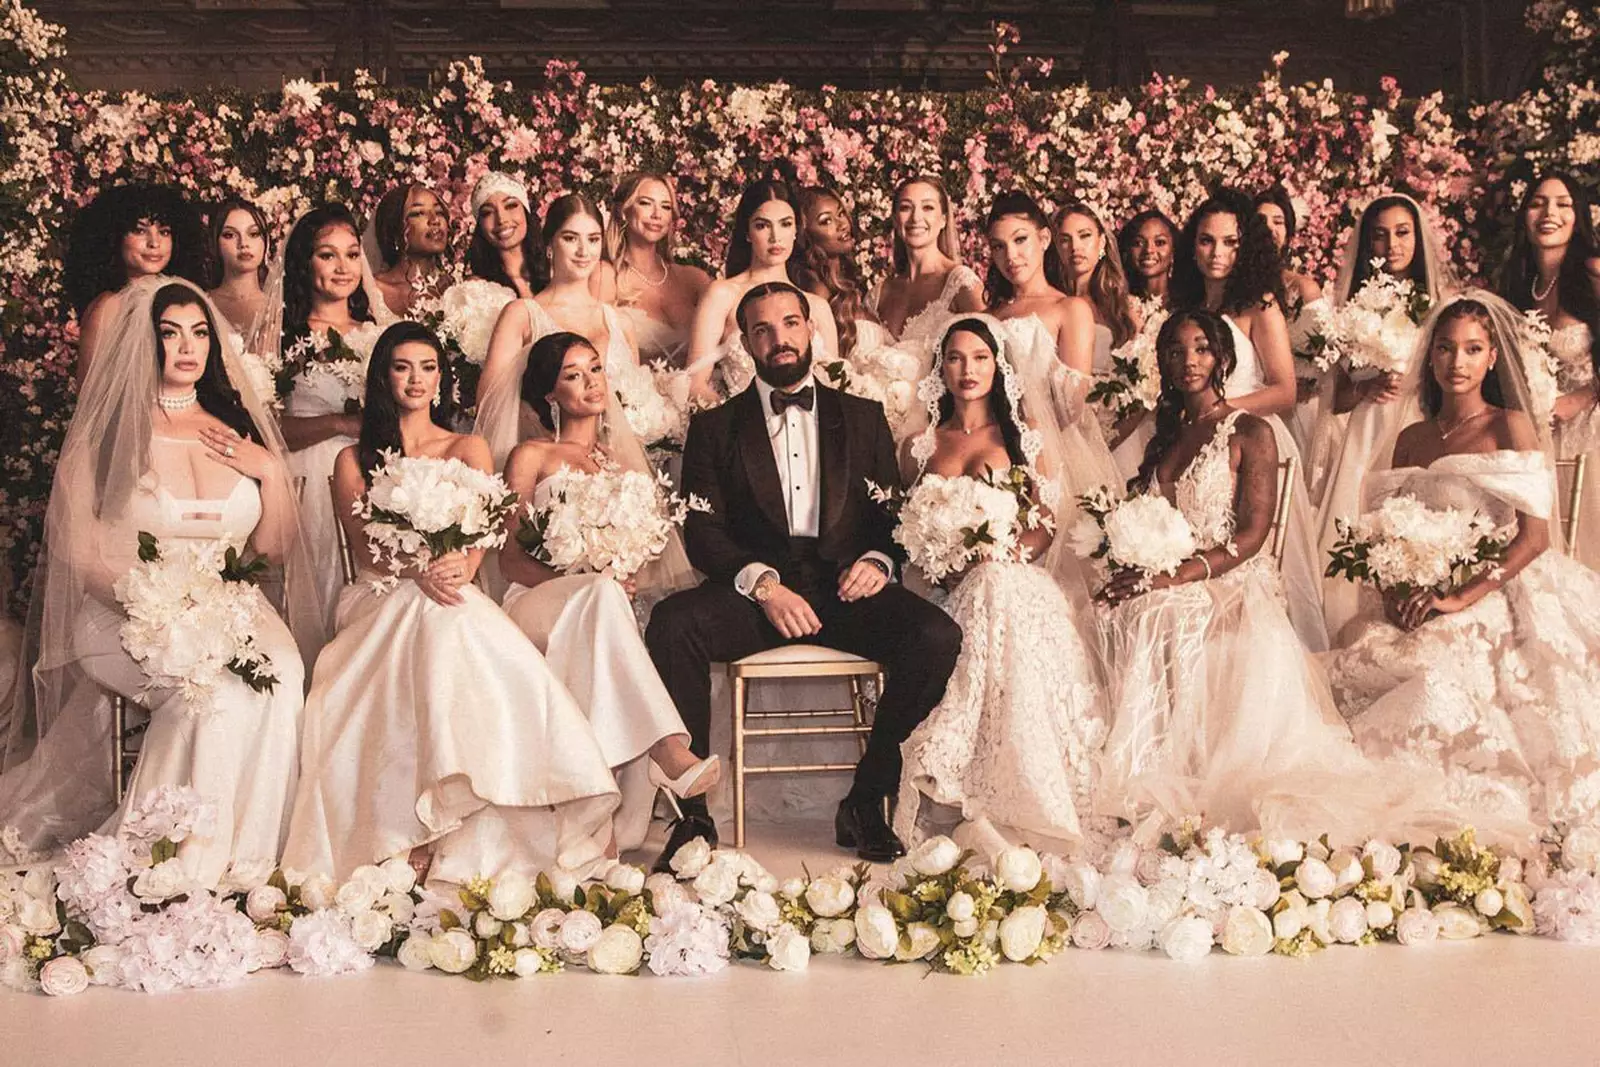 Drake surprises fans with new album then marries 23 women in new video